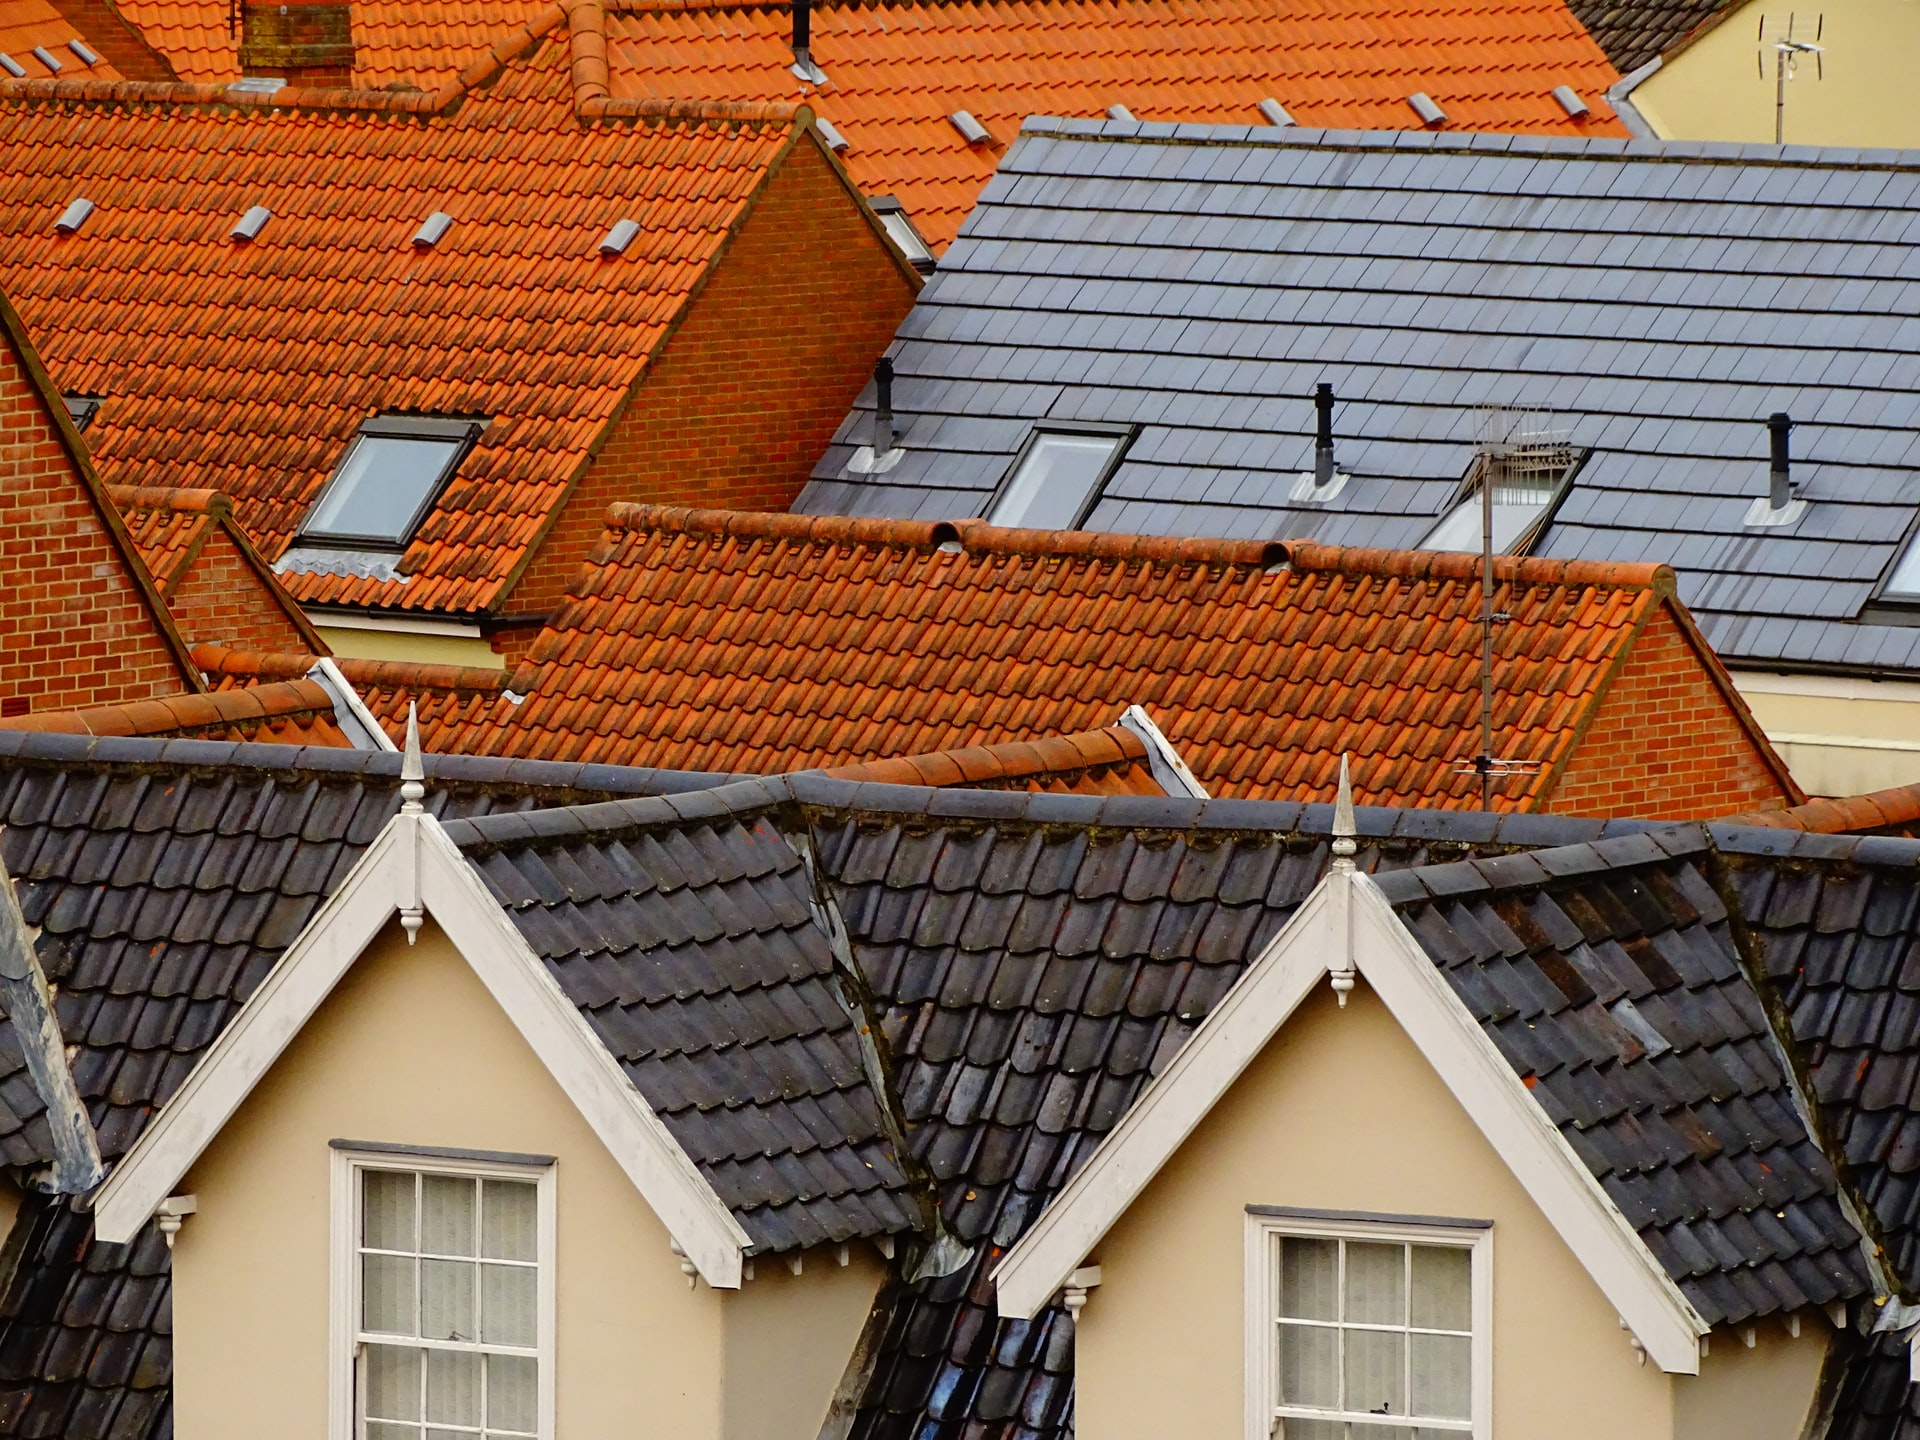 Damaged roof? Get it repaired ASAP